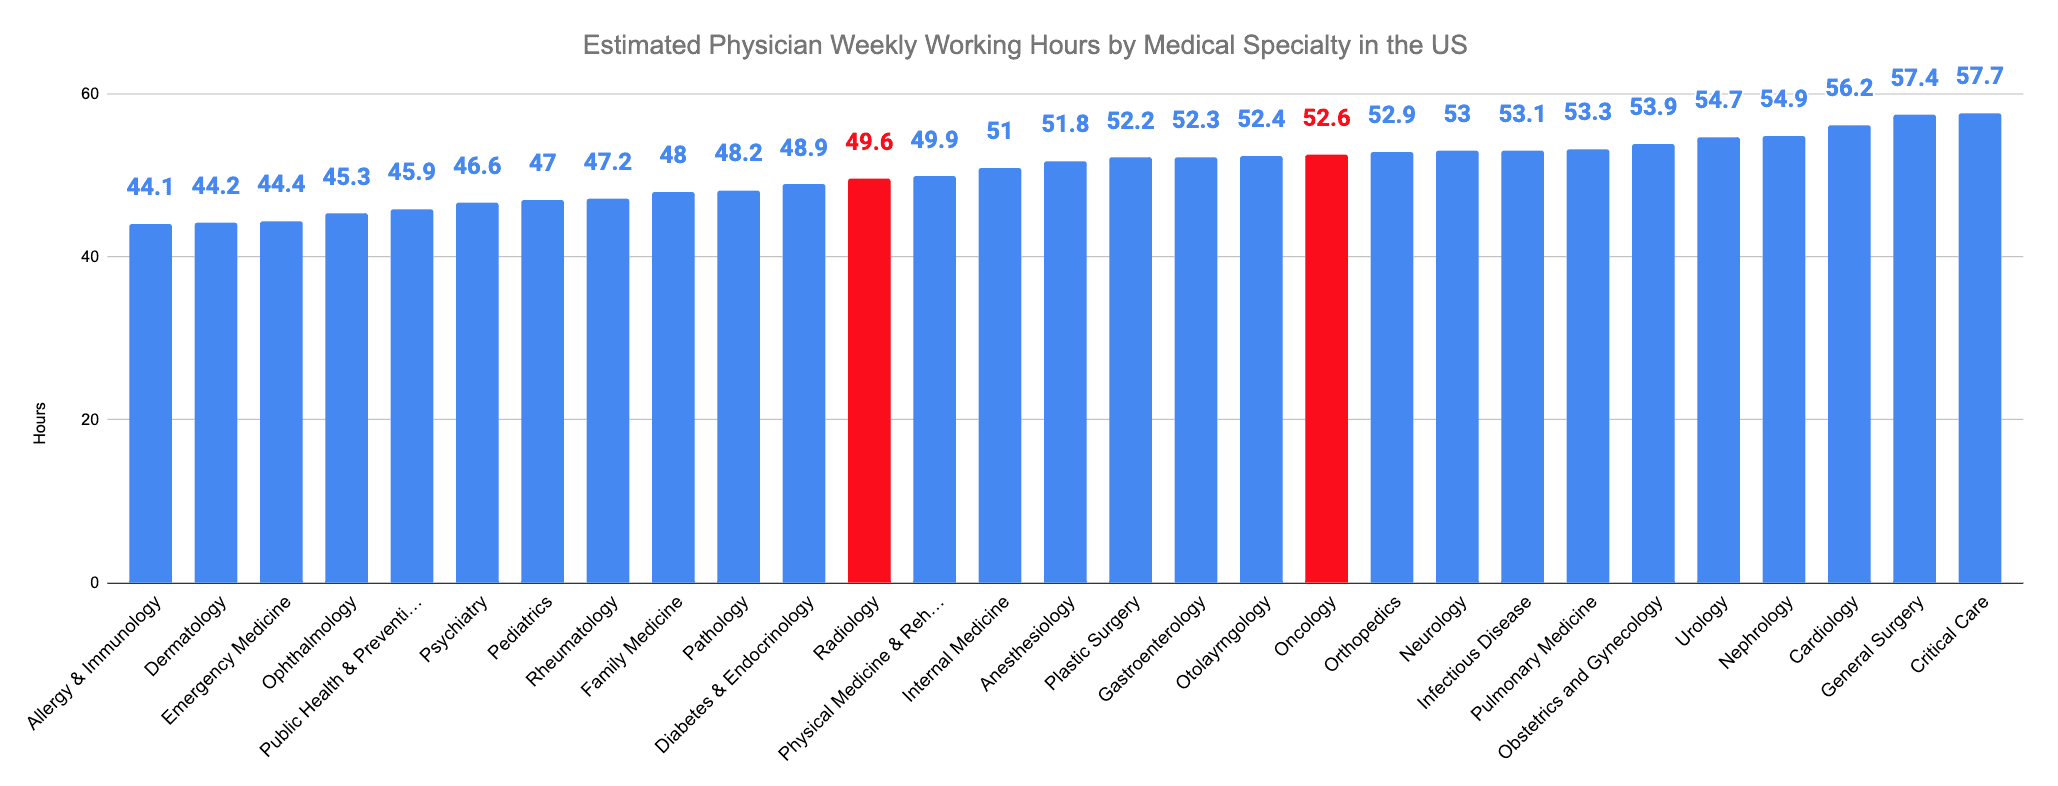 Radiology vs. Hematology and Oncology Estimated Physician Weekly Working Hours by Medical Specialty in the US